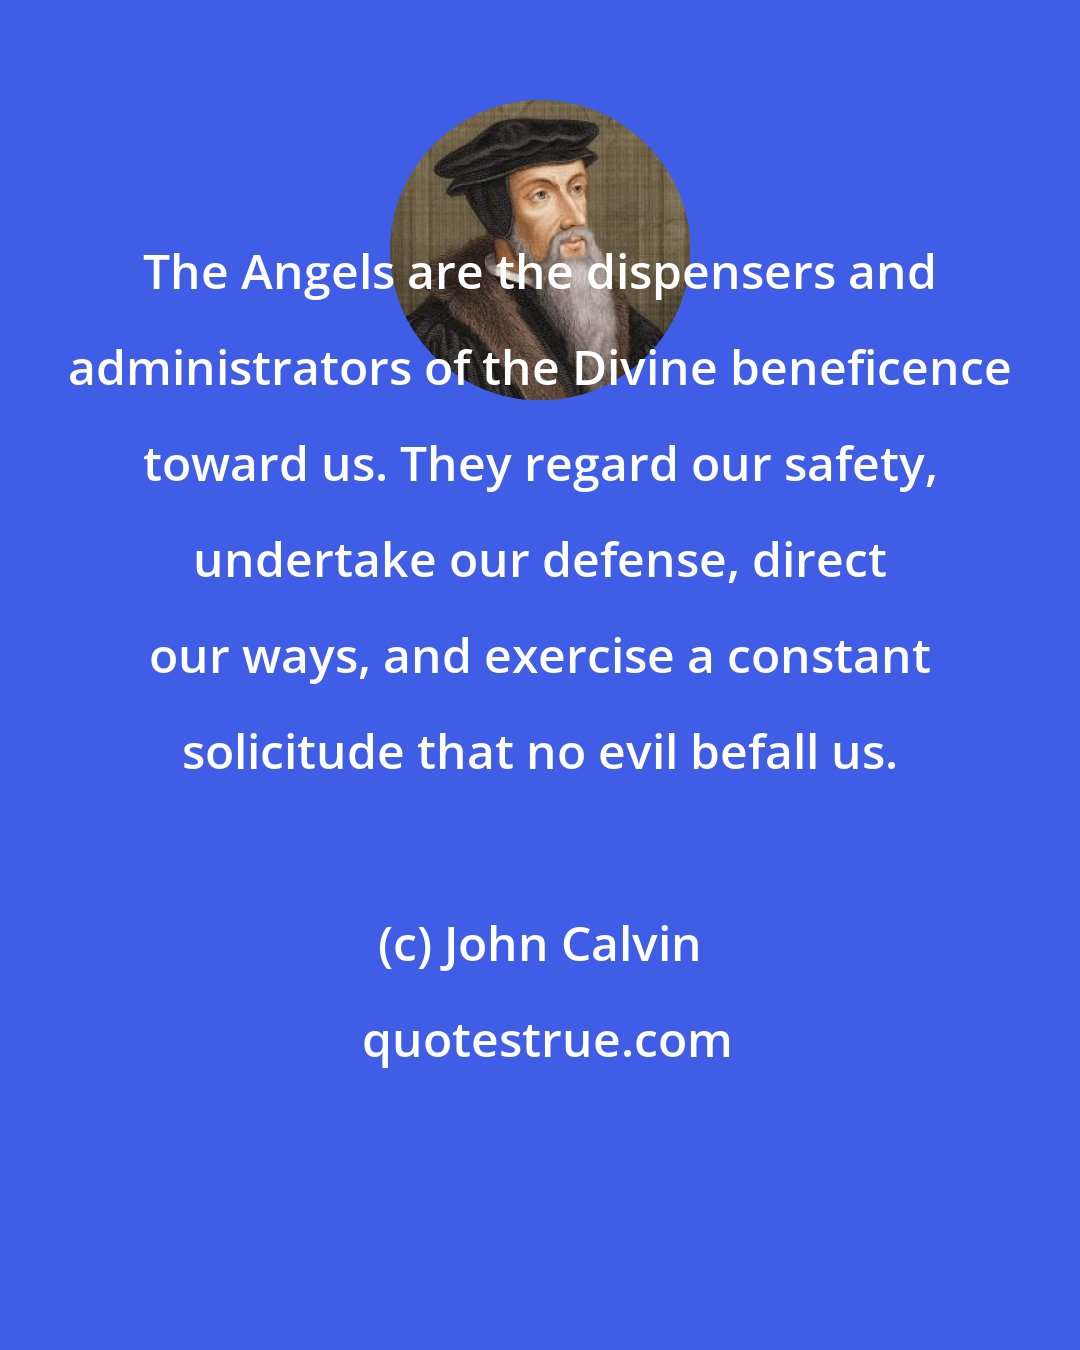 John Calvin: The Angels are the dispensers and administrators of the Divine beneficence toward us. They regard our safety, undertake our defense, direct our ways, and exercise a constant solicitude that no evil befall us.